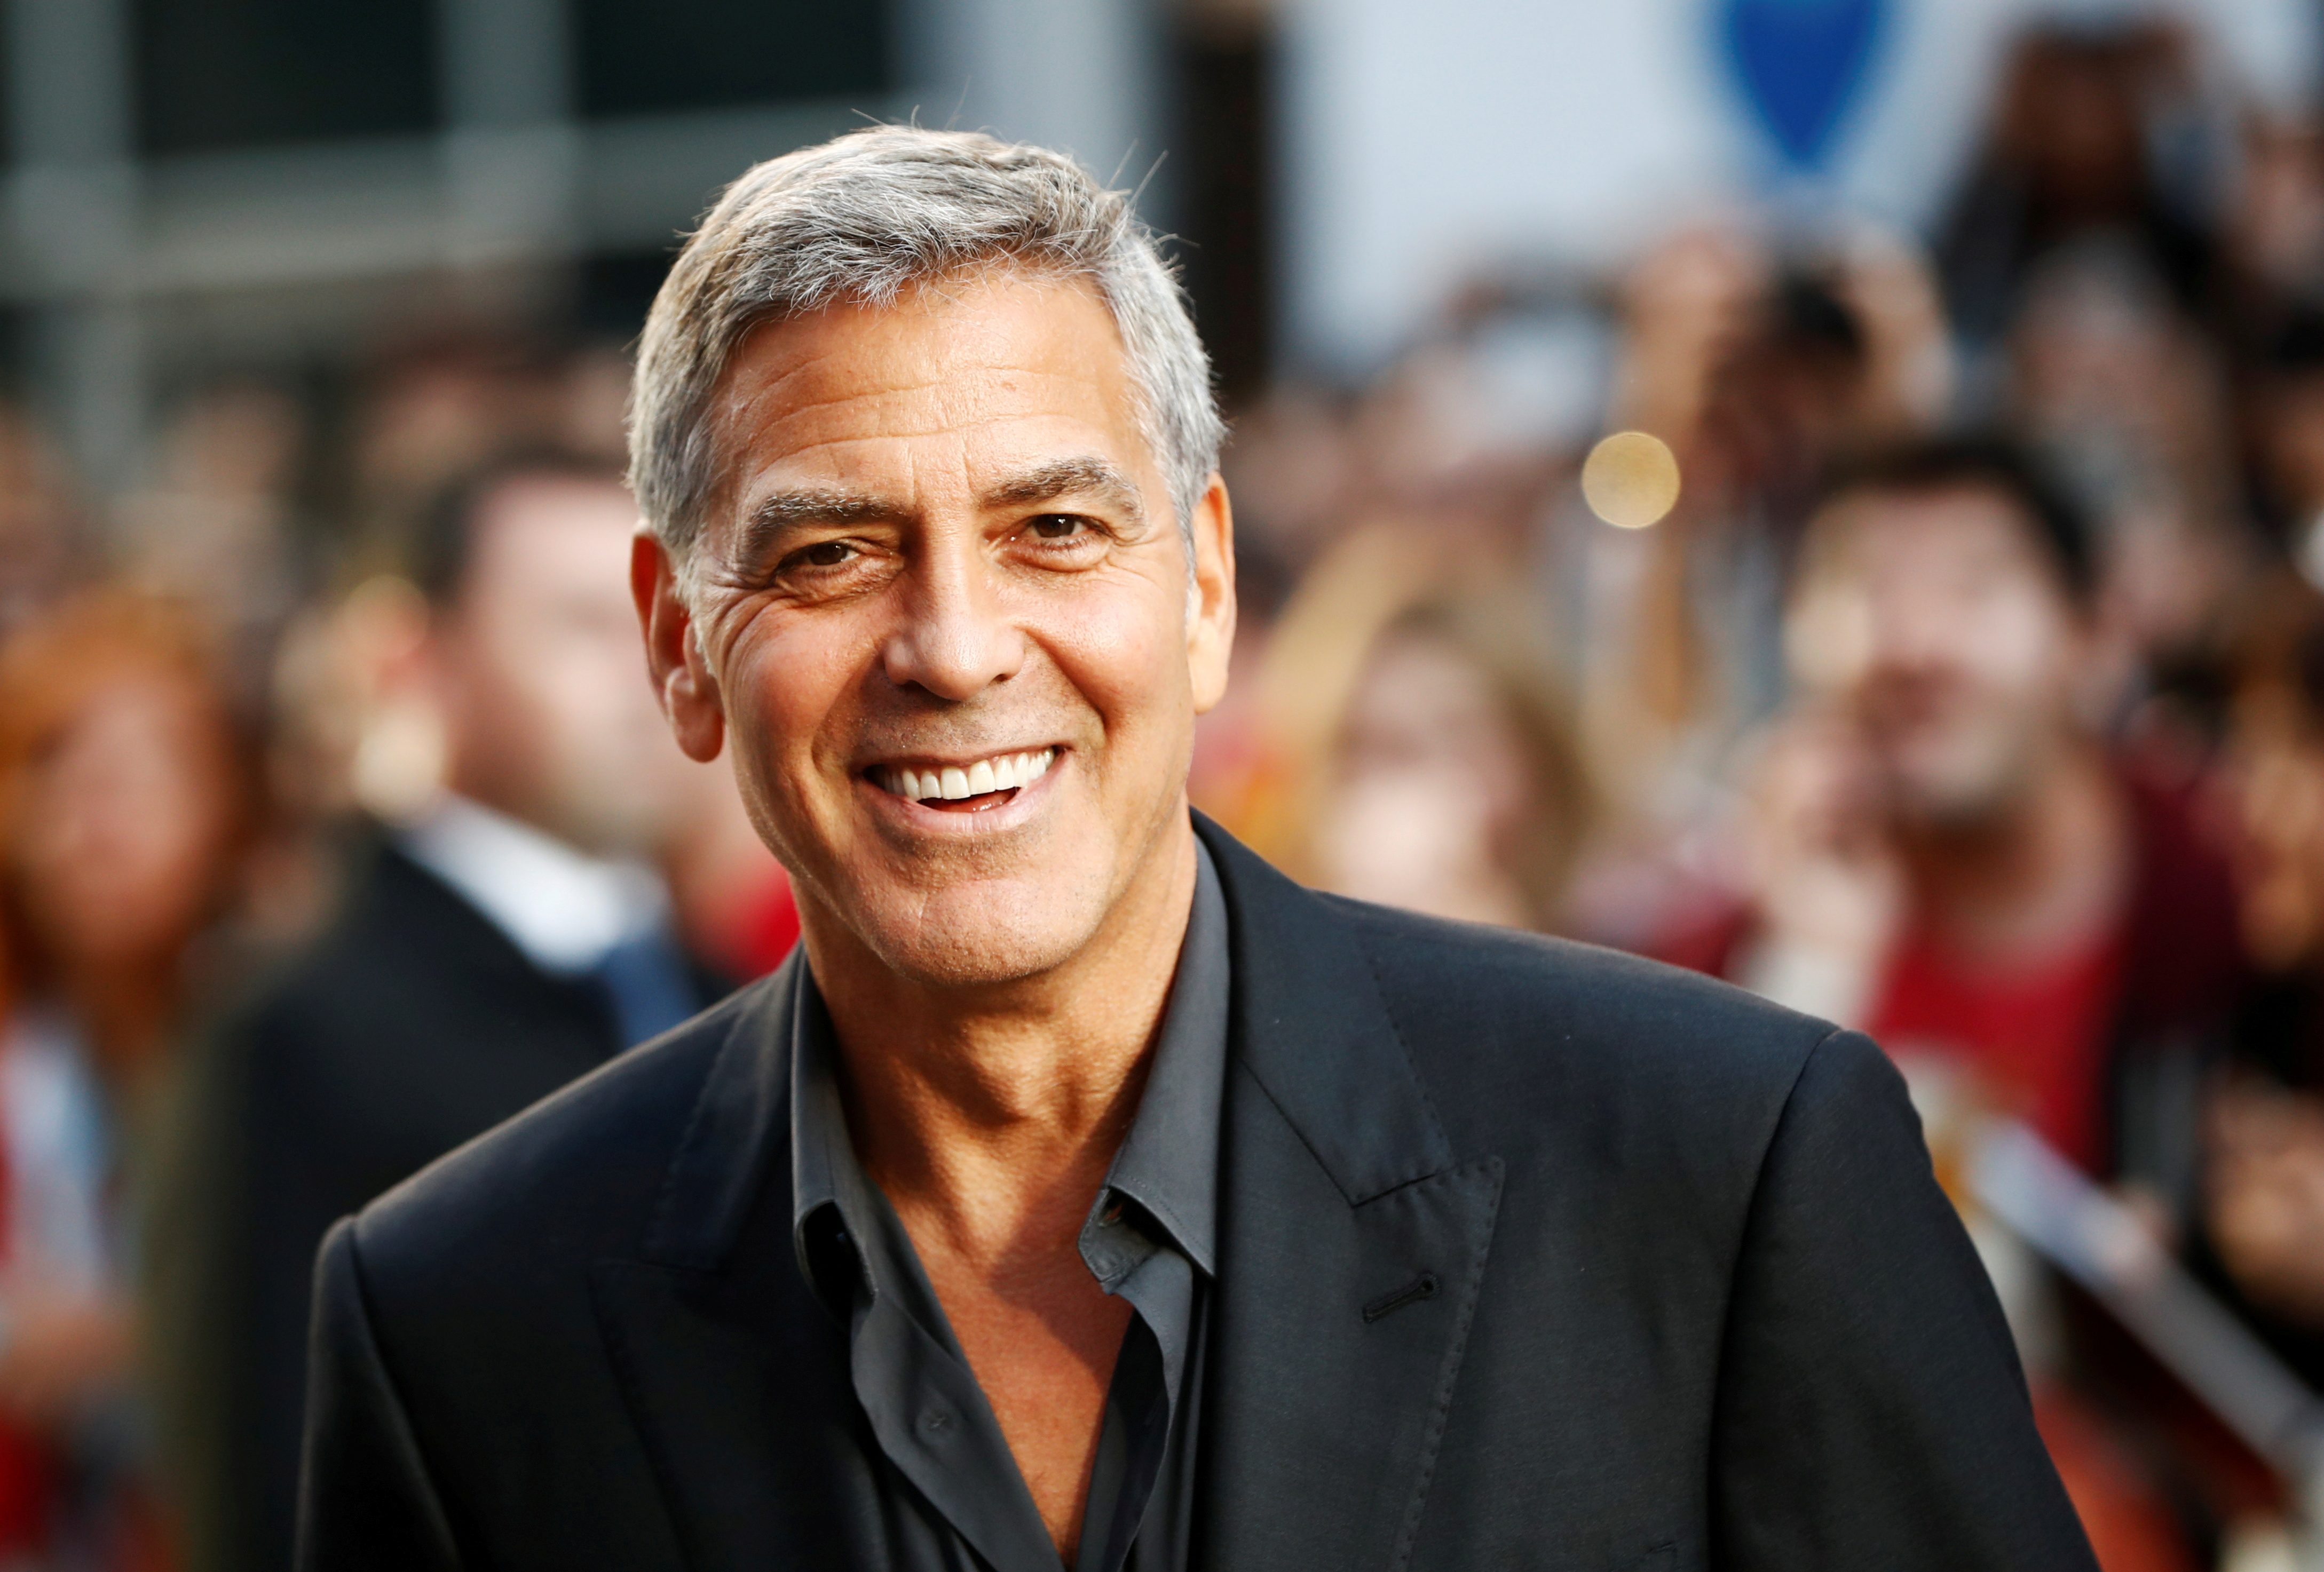 George Clooney and friends open school to train film crews